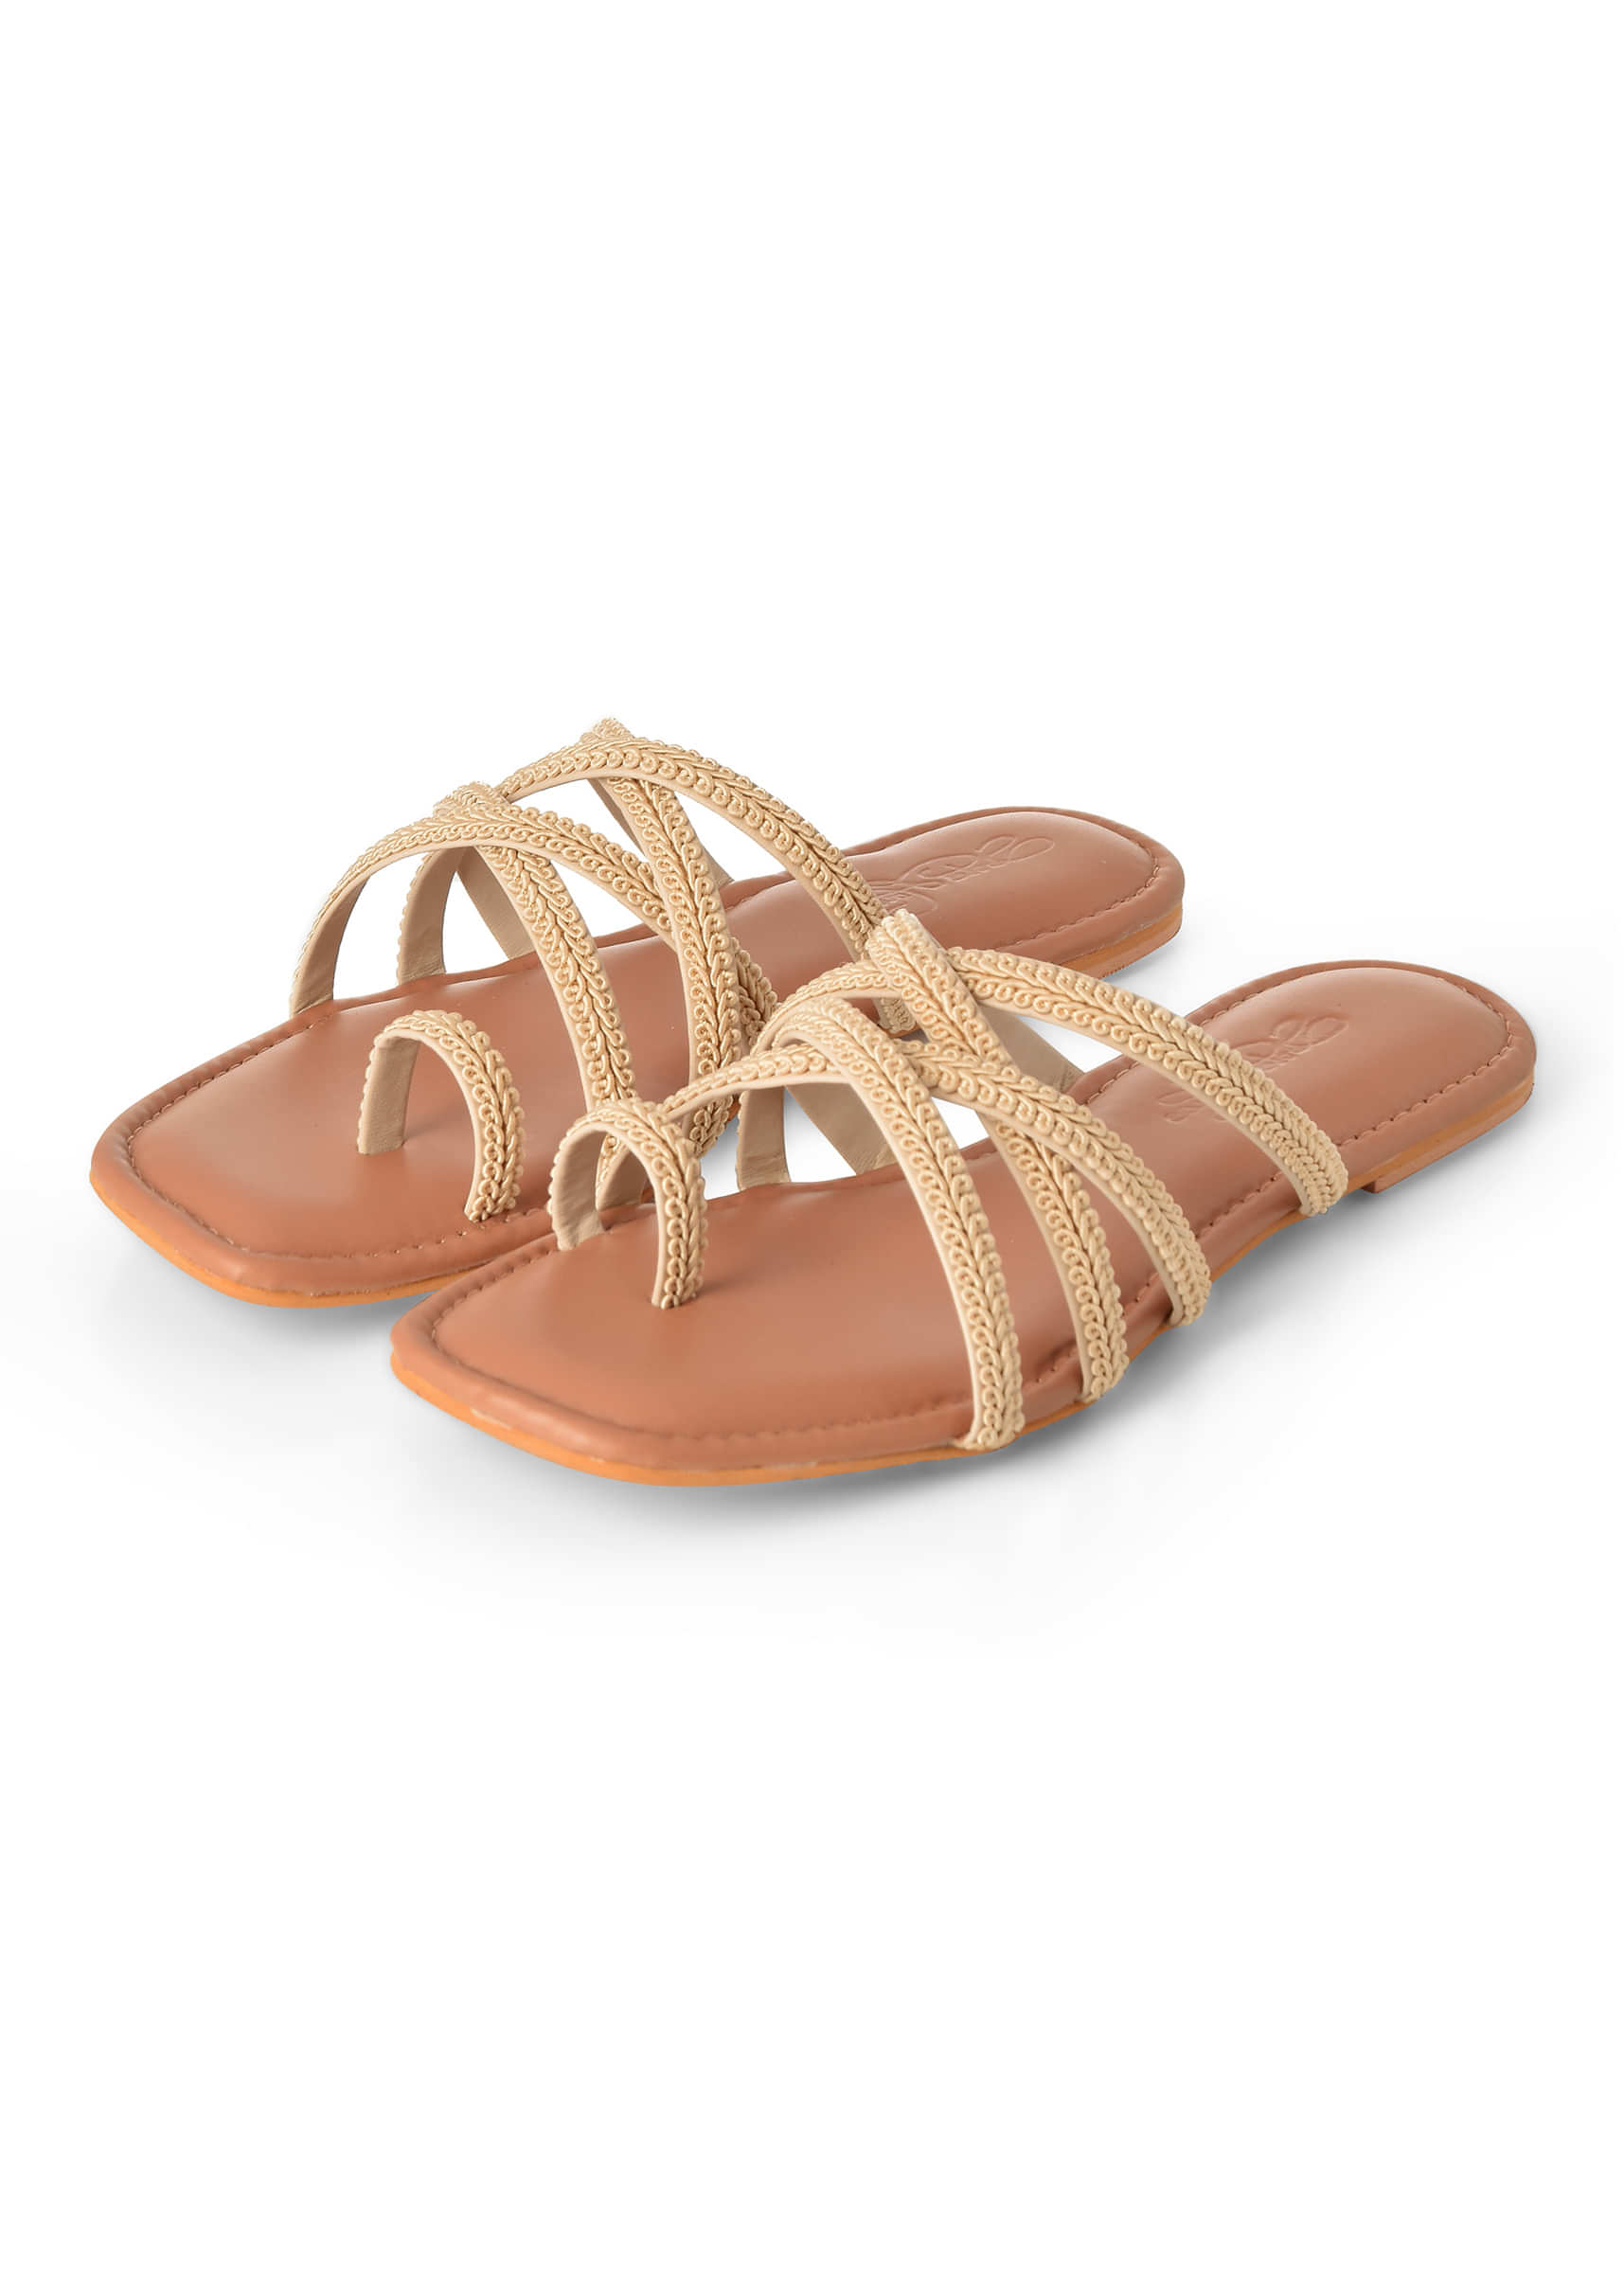 Creme Lace Up Flats With A Patterned Outsole